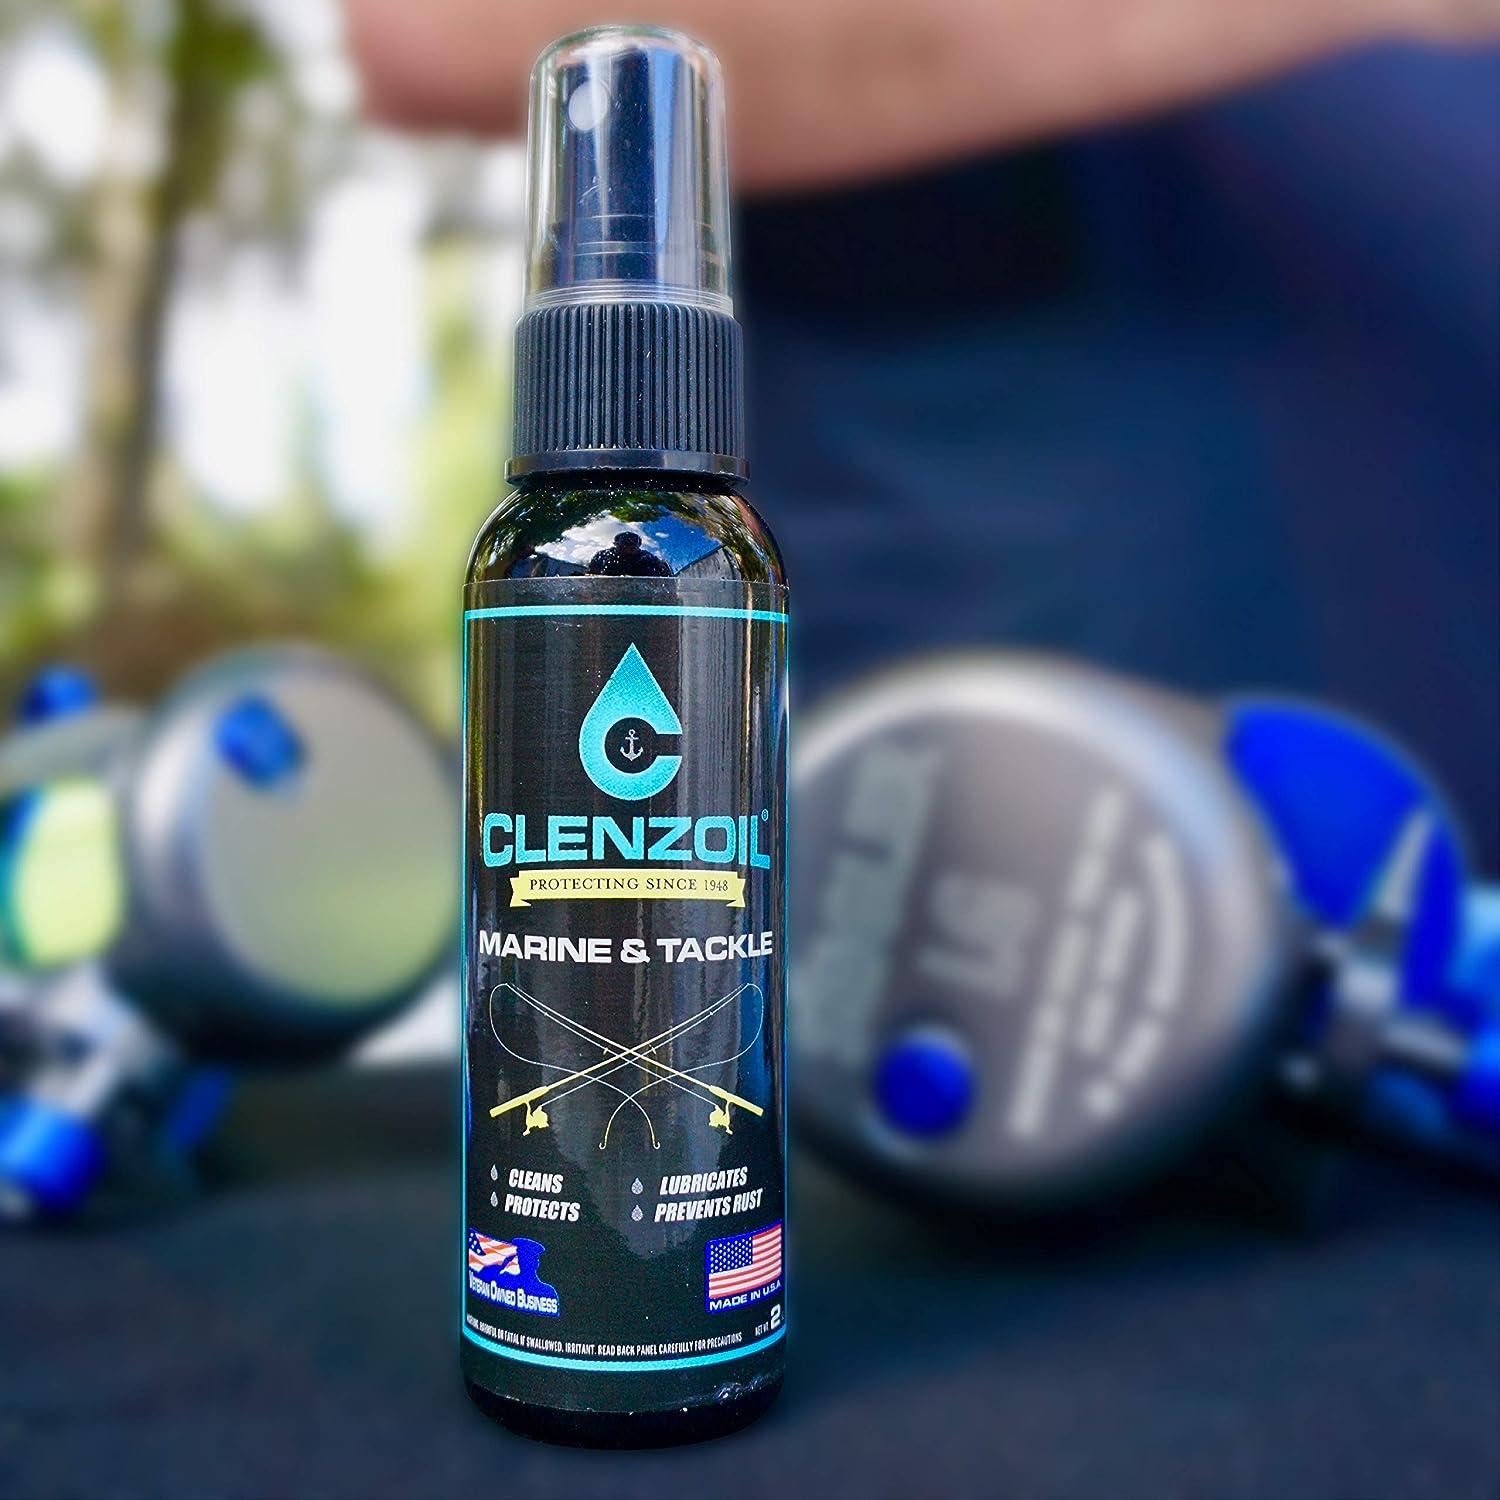  Clenzoil Marine & Tackle Rust Prevention Spray Lubricant &  Corrosion Inhibitor, One-Step Cleaner, Lubricant, Protectant